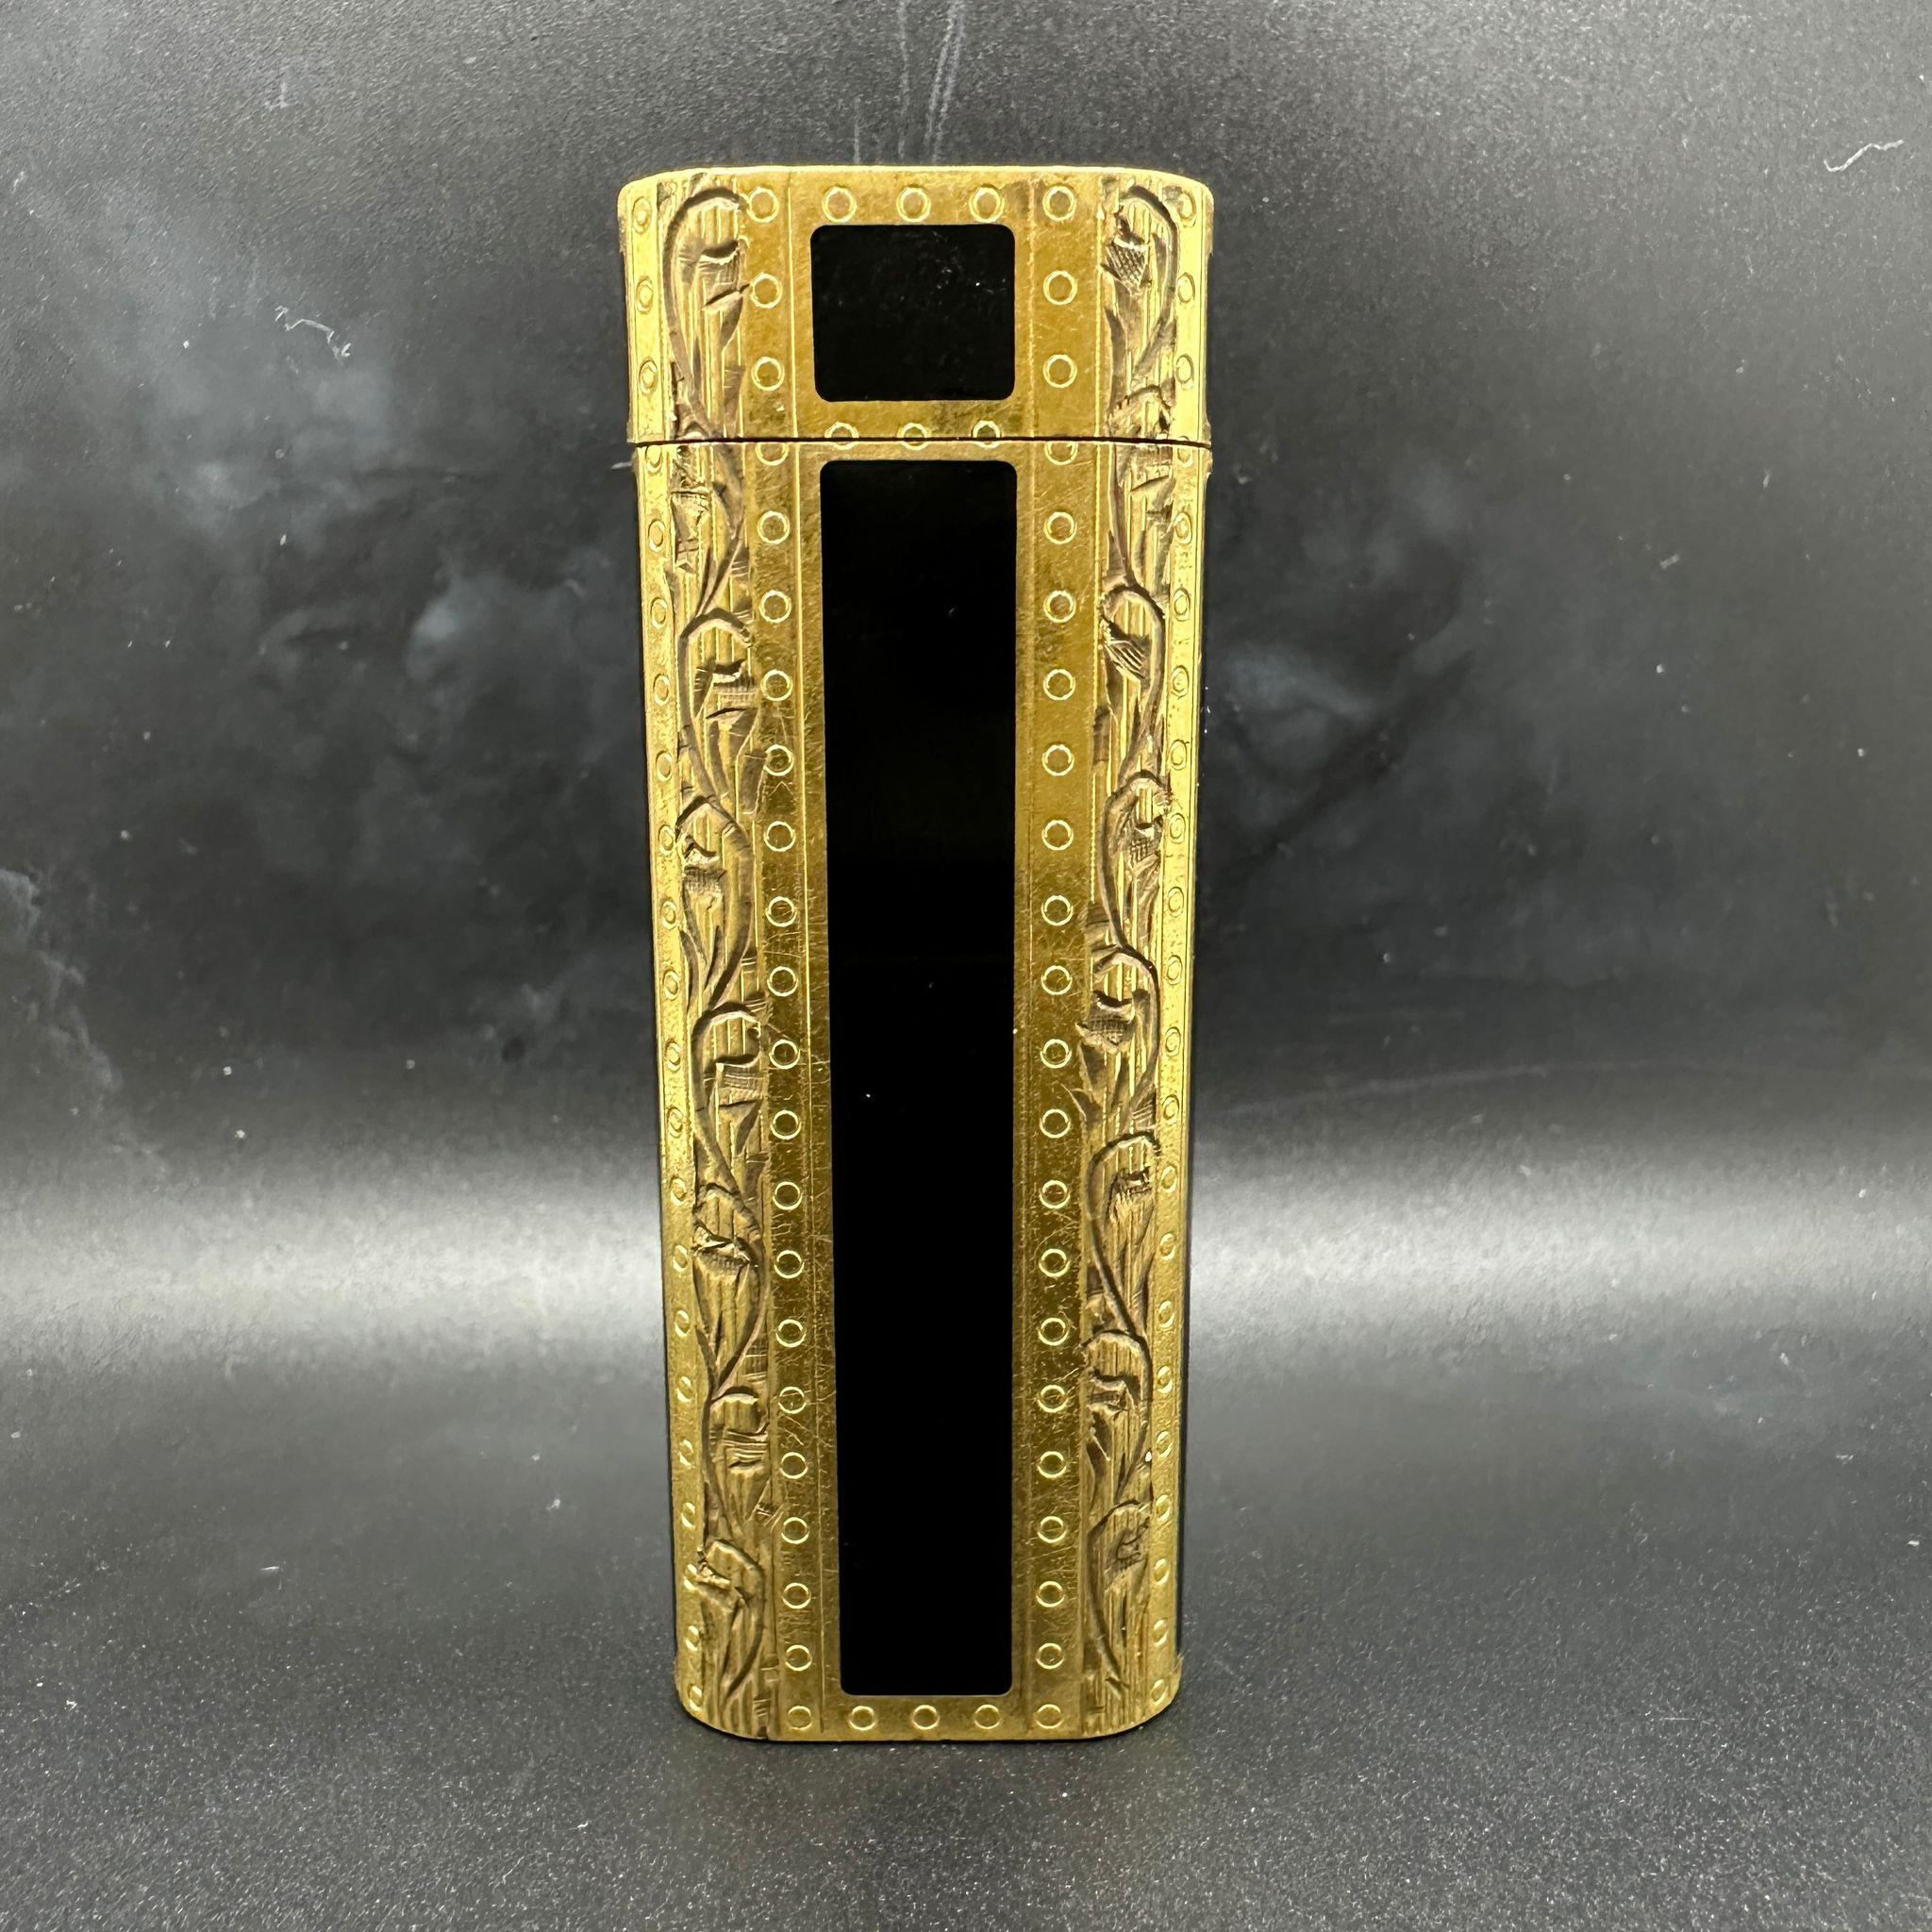 Beautiful Cartier Royking lighter.
CARTIER  RoyKing Rollagas, a Unique RARE example of a ROYKING designed Cartier Rollagas lighter made circa 1970's, Gold with Baroque lacquer, 
Baroque design,
mint condition,
Roy King emblem on top side part of